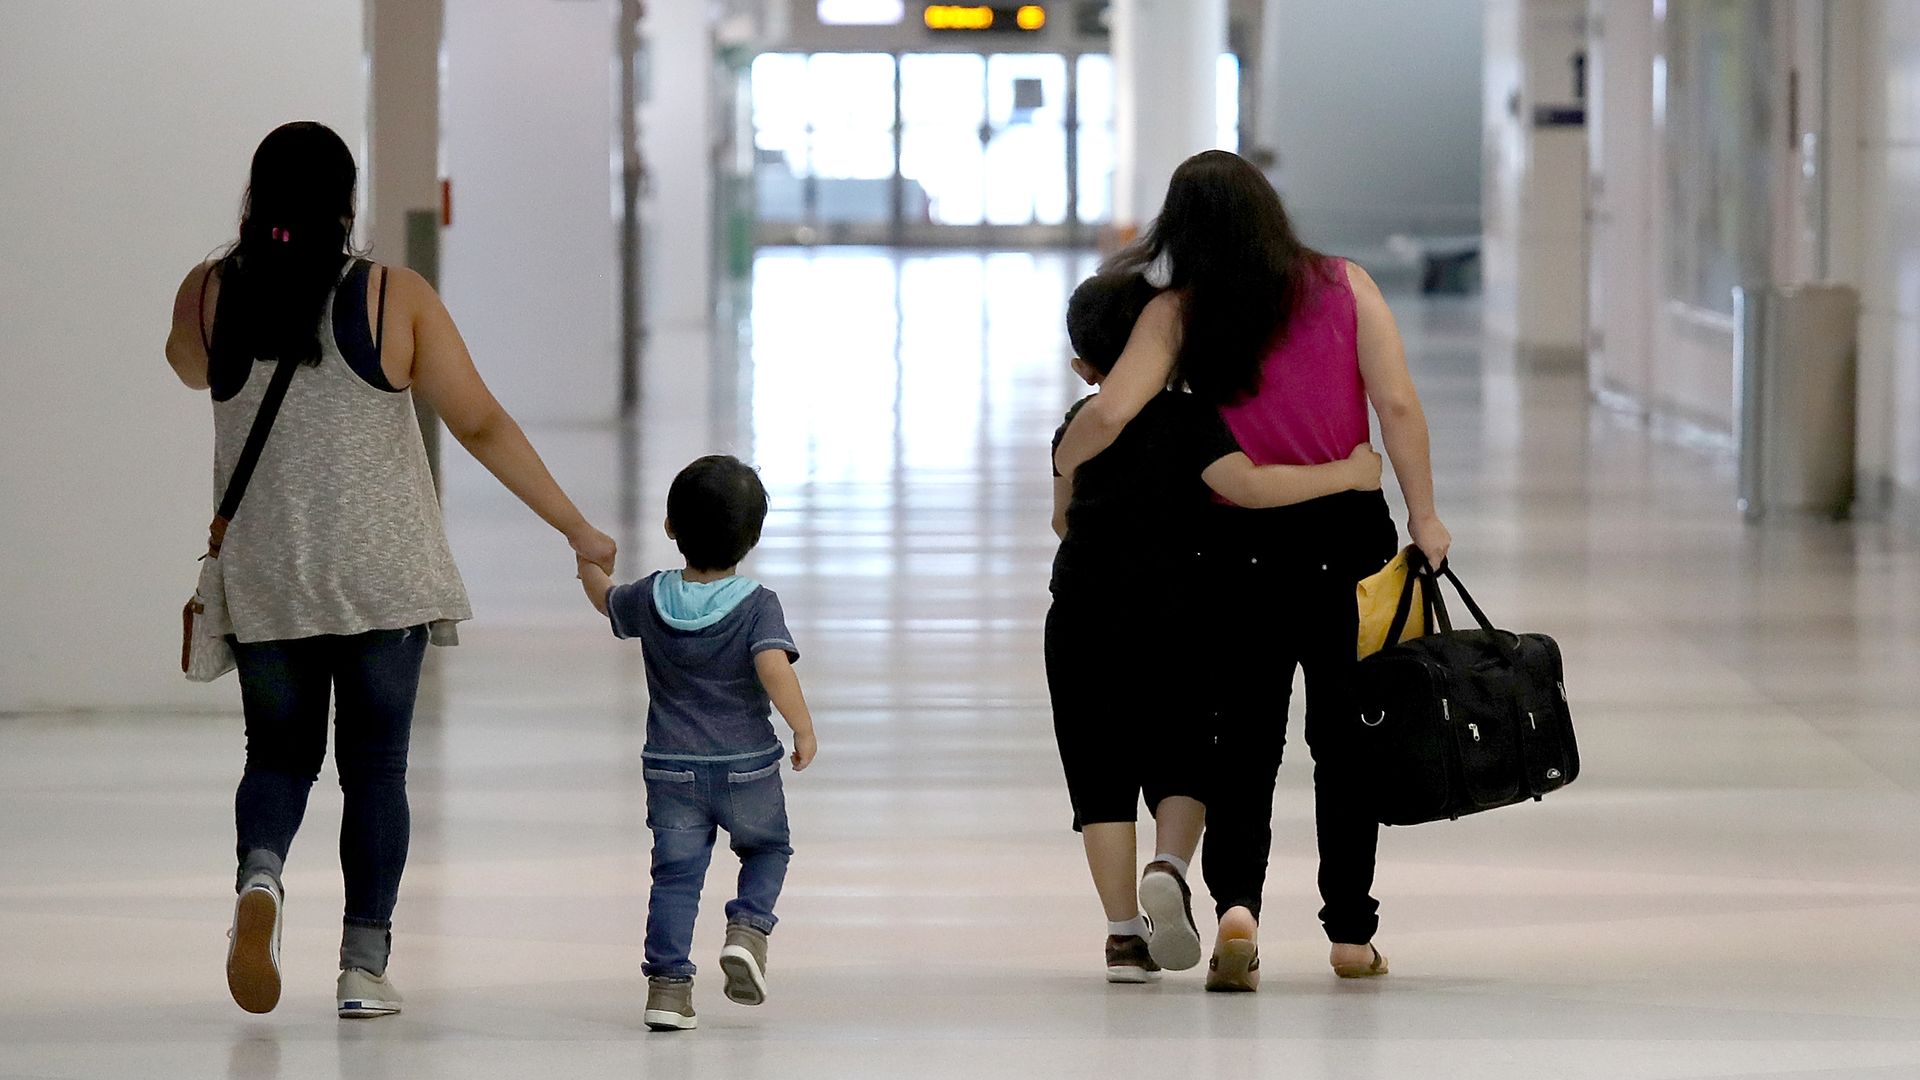 Seven-year-old Andy is reunited with his mother at an airport in 2018. The mother and son were separated upon entering the United States 